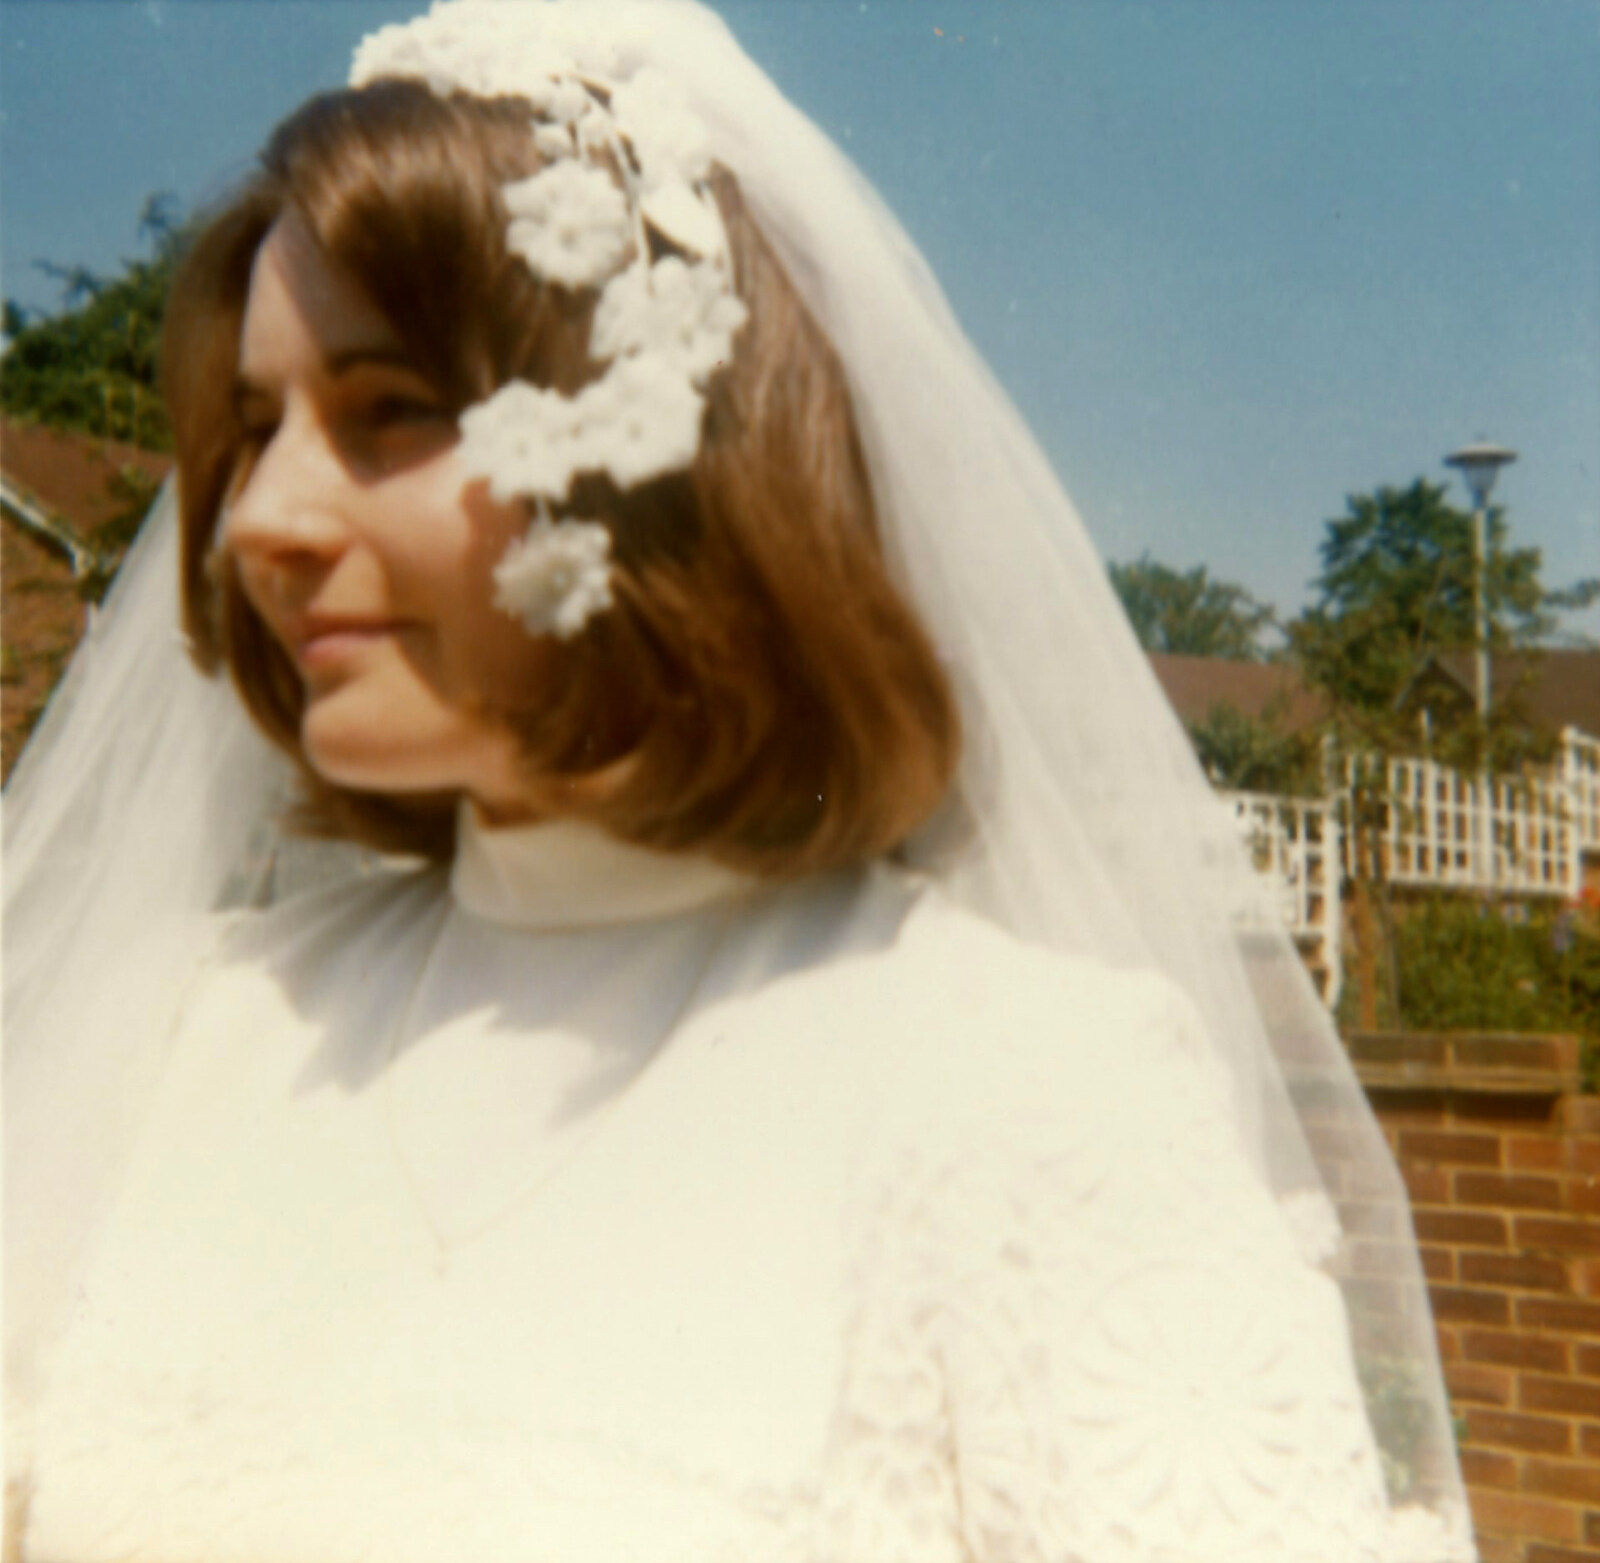 Family History: The 1970s, Timperley and Sandbach, Cheshire - 24th January 2020: Caroline in wedding veil